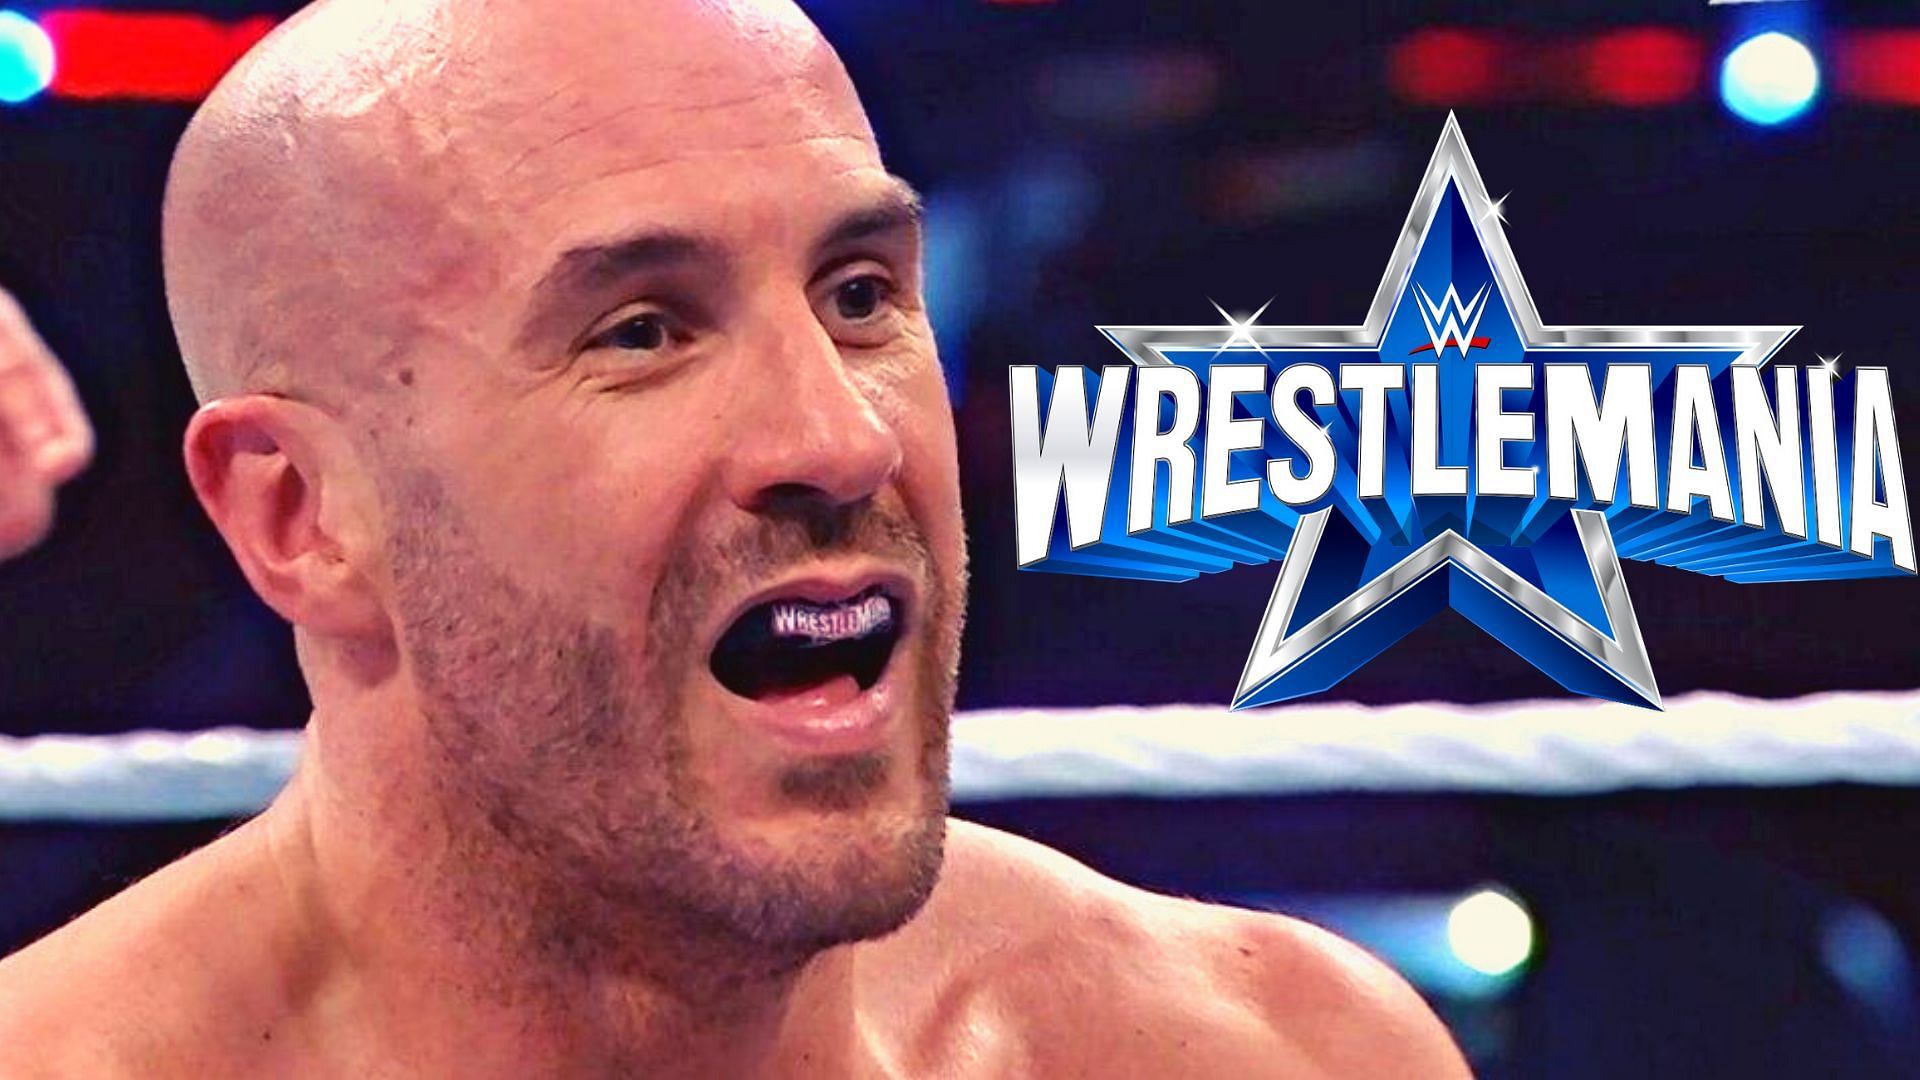 Cesaro is one of the most technically-sound wrestlers in the WWE.